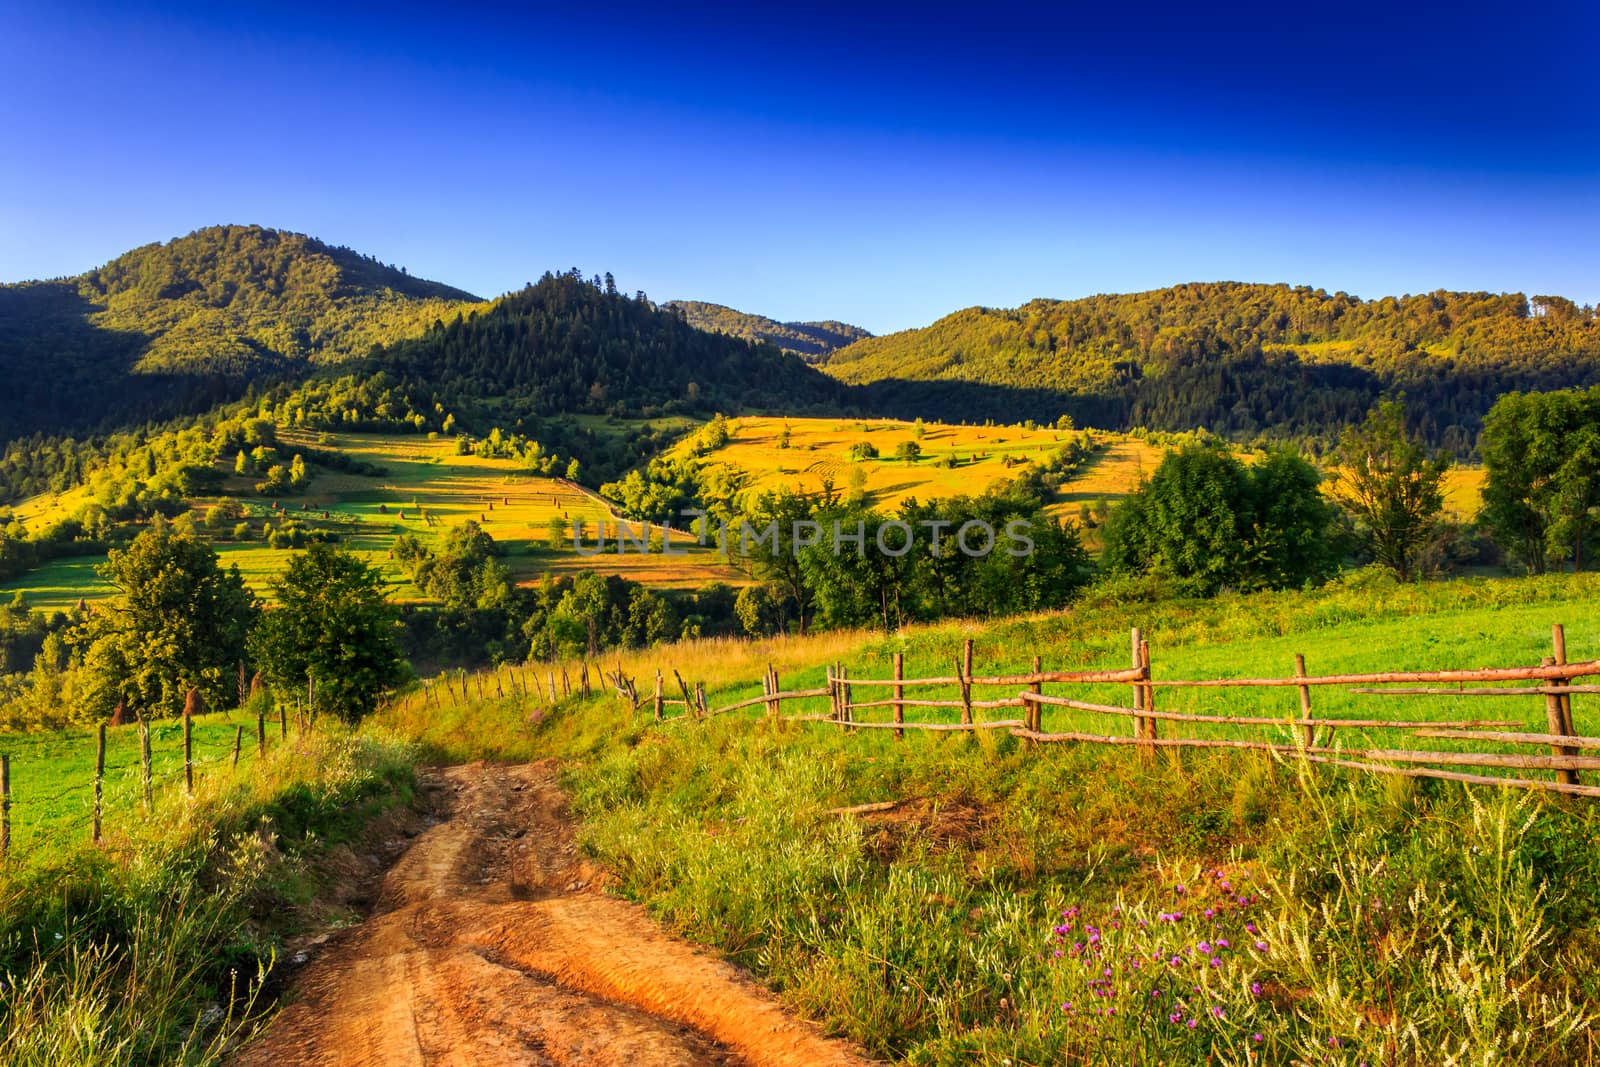 The road to the high mountains in the early morning near the wooden fence